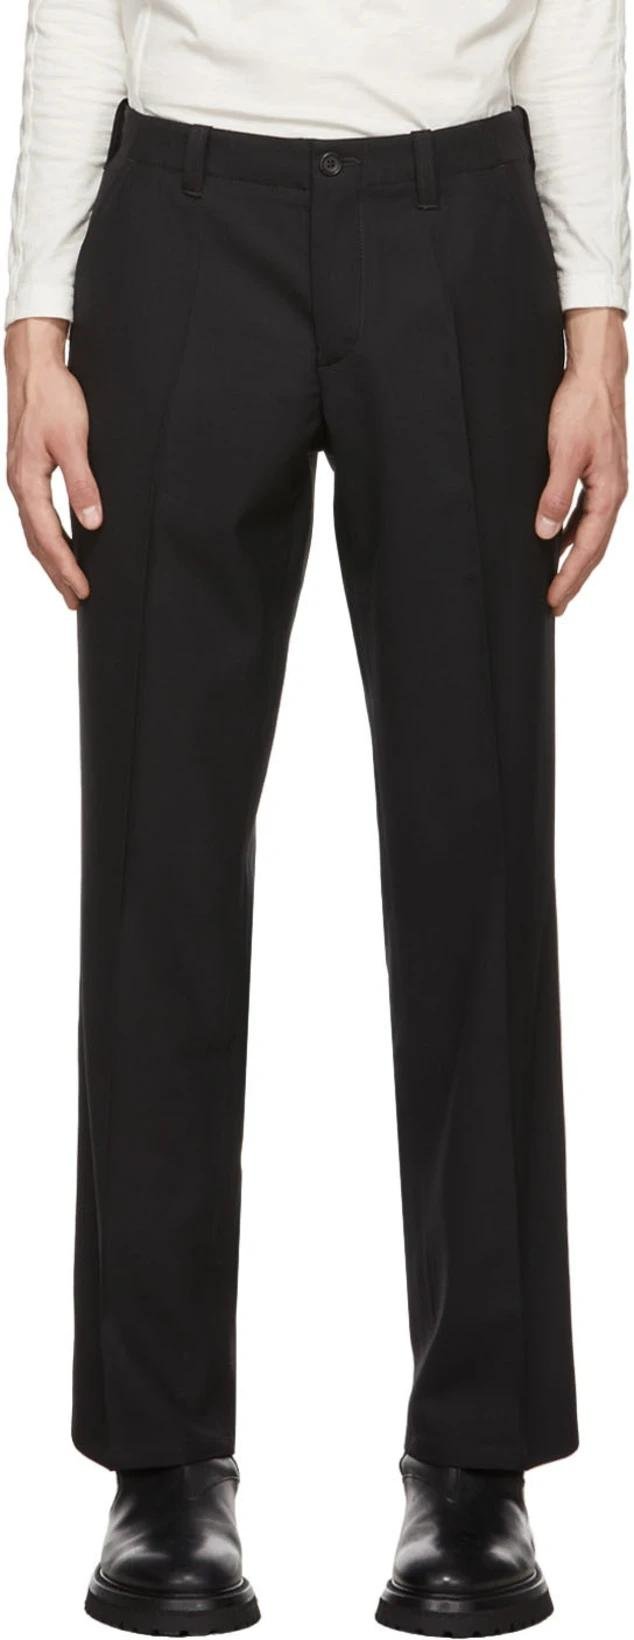 SSENSE Exclusive Black Classic Trousers by ADYAR